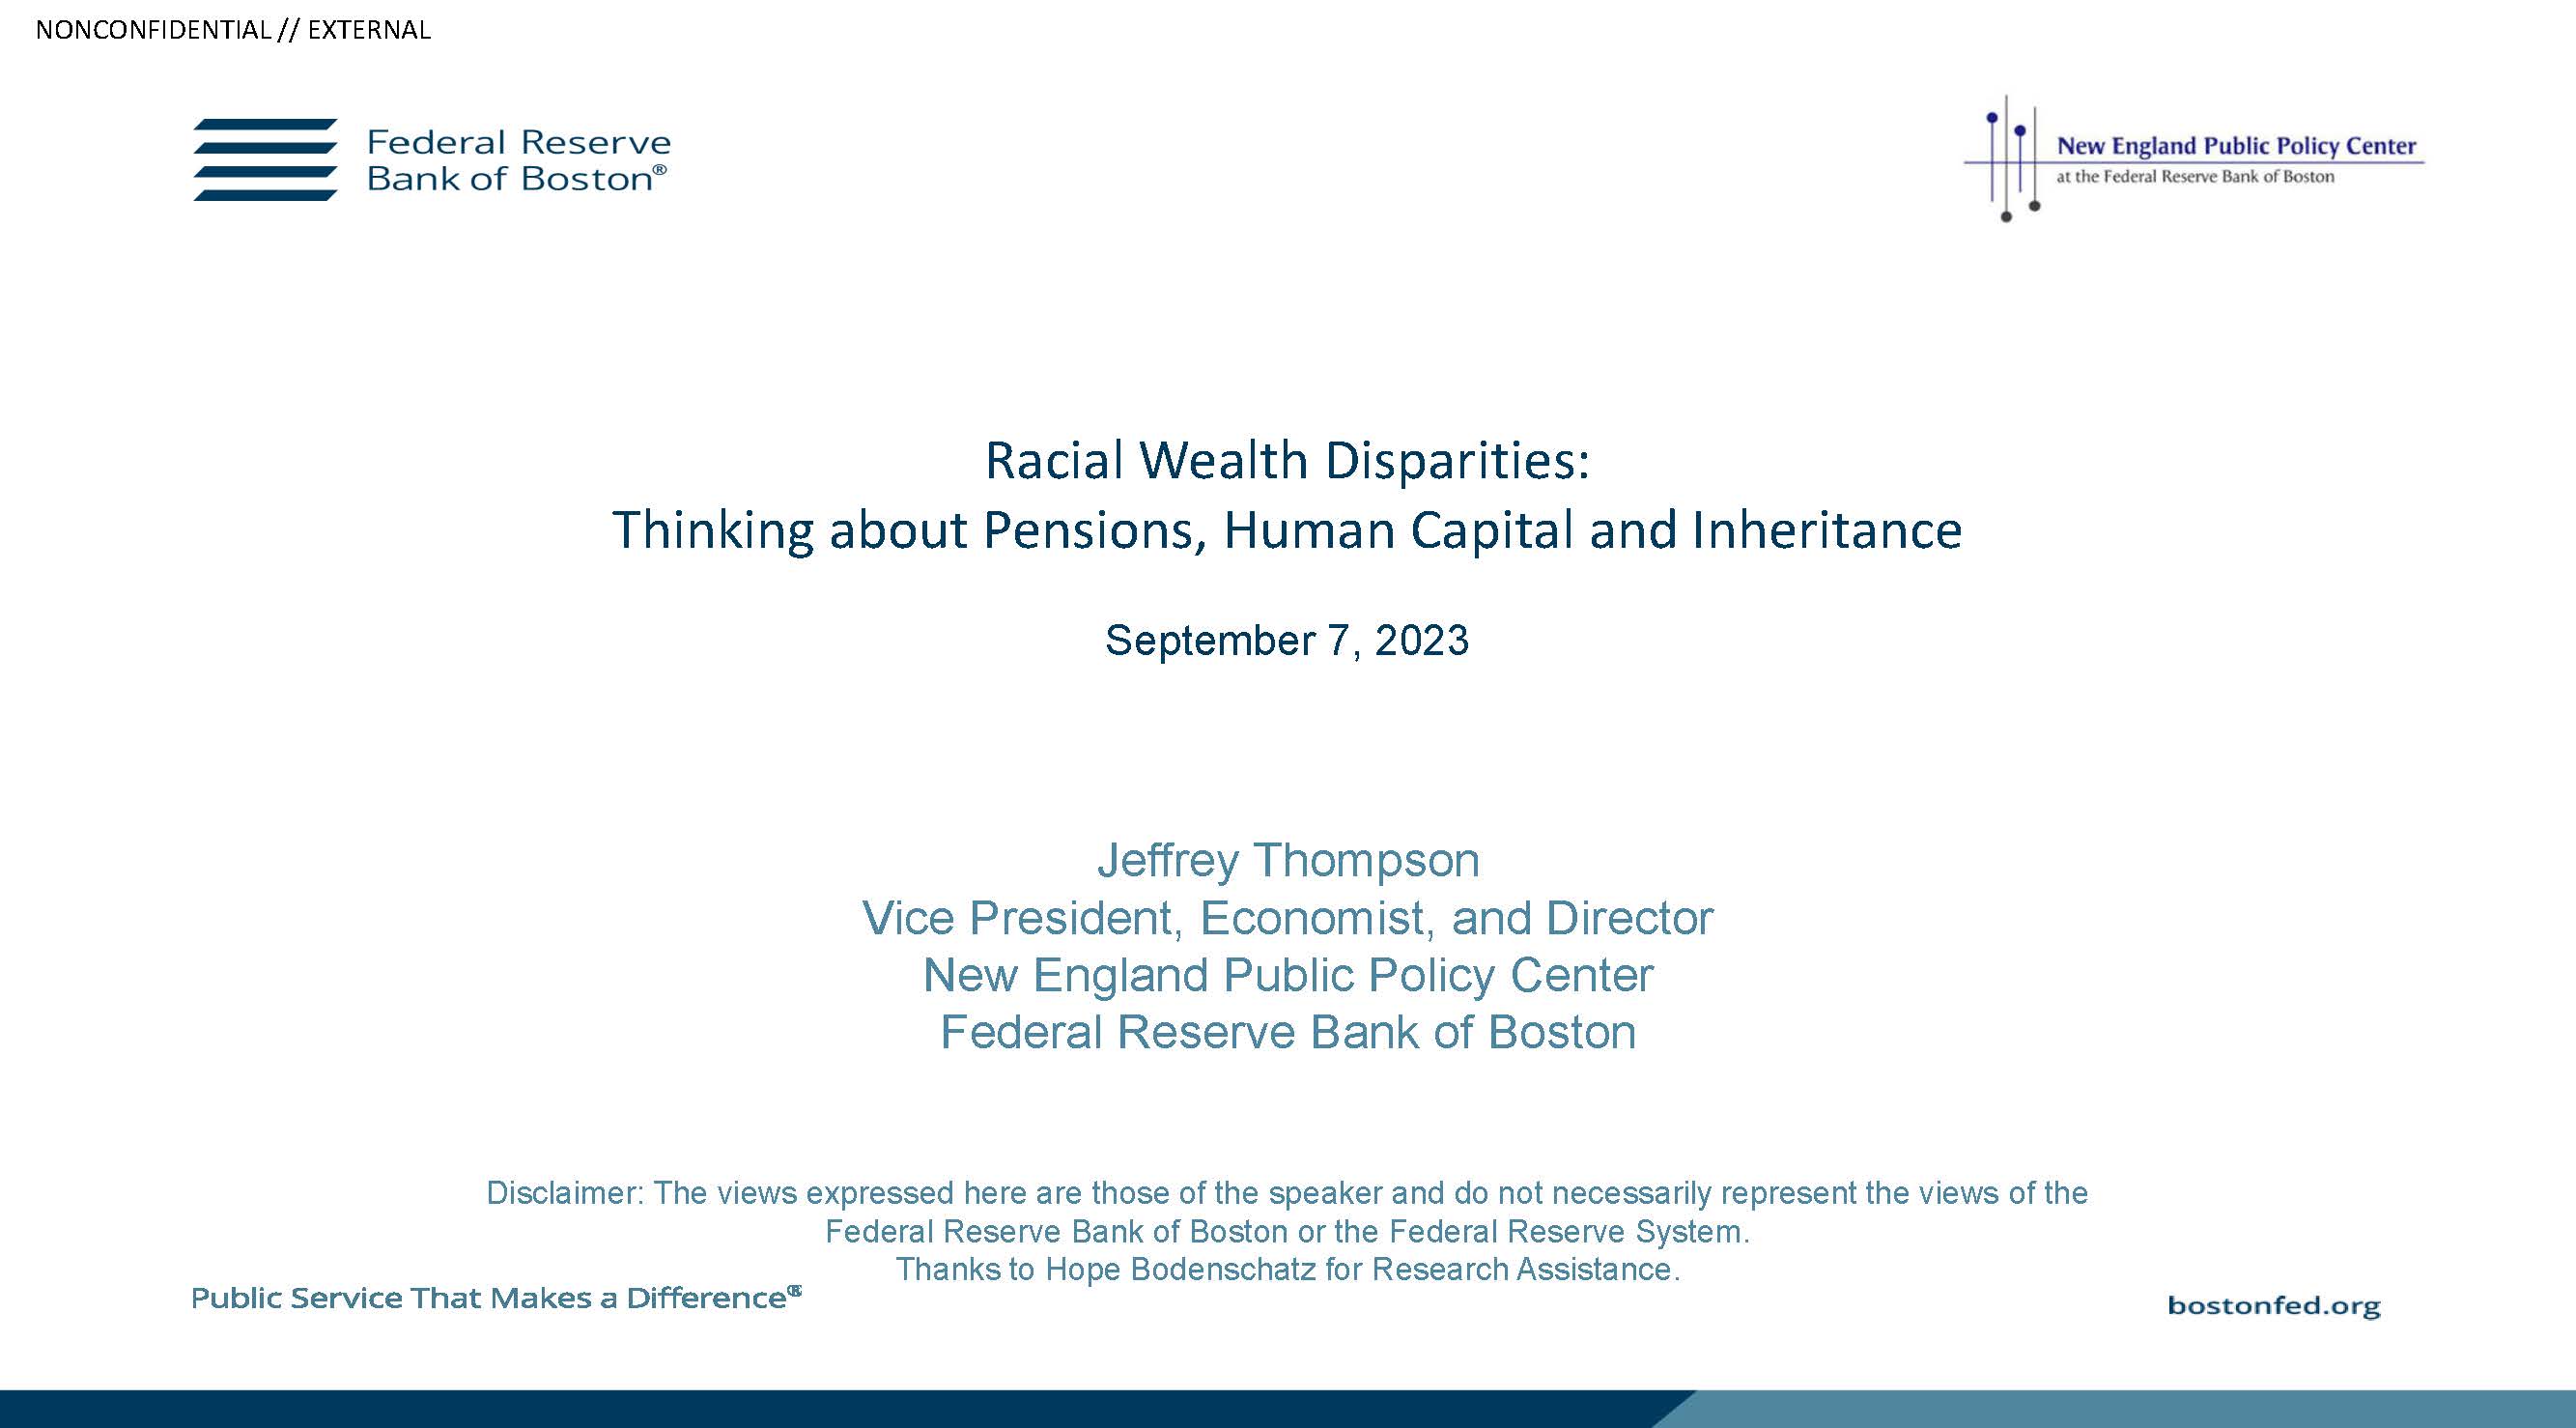 Racial Wealth Disparities: Thinking about Pensions, Human Capital and Inheritance. September 7, 2023. Jeffrey Thompson